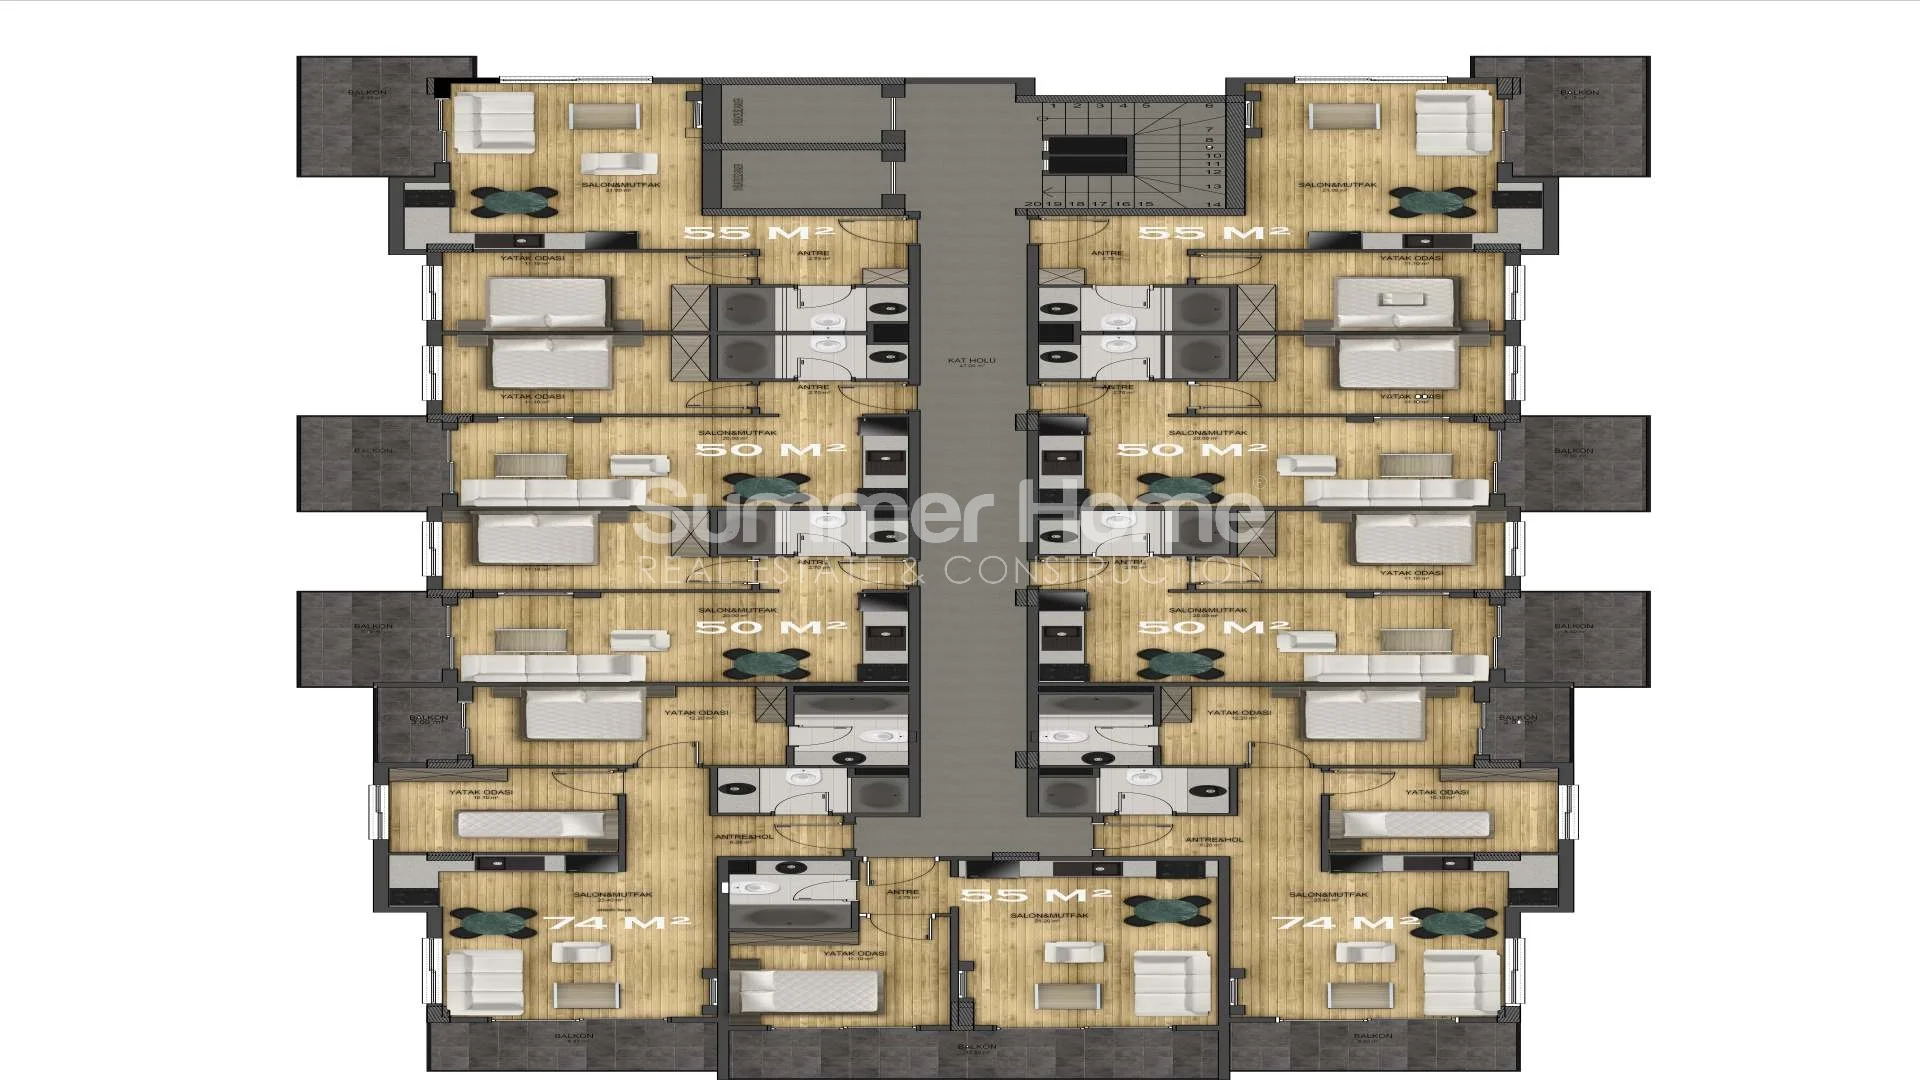 Extraordinary New Apartments for sale in Kargicak Plan - 29